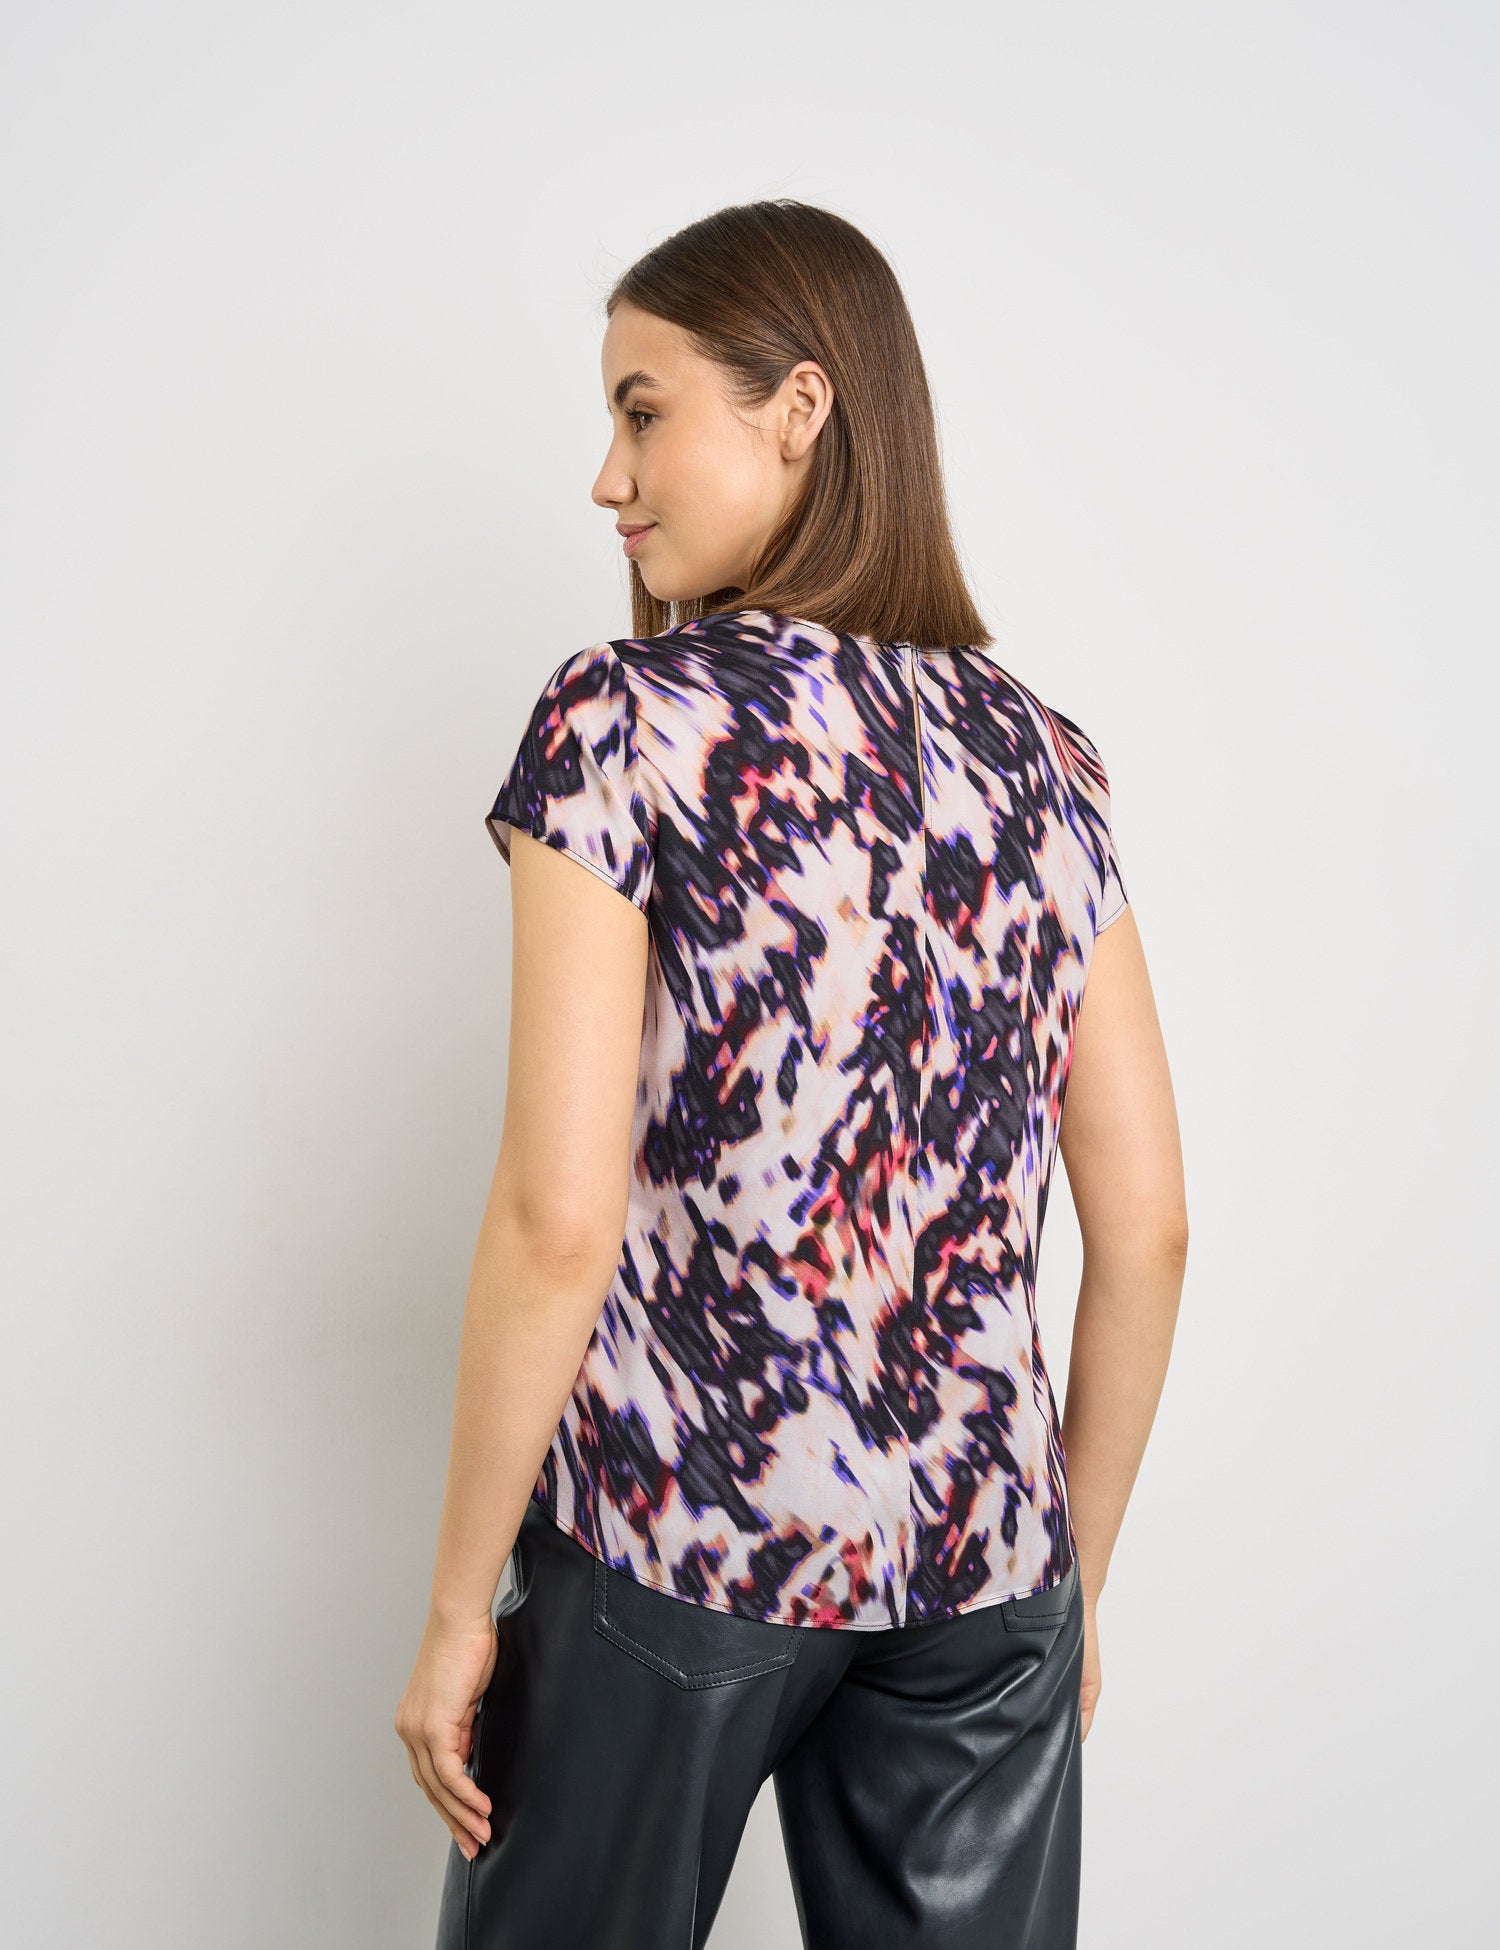 Fine Blouse Top With An All-Over Print_560316-11009_9452_06